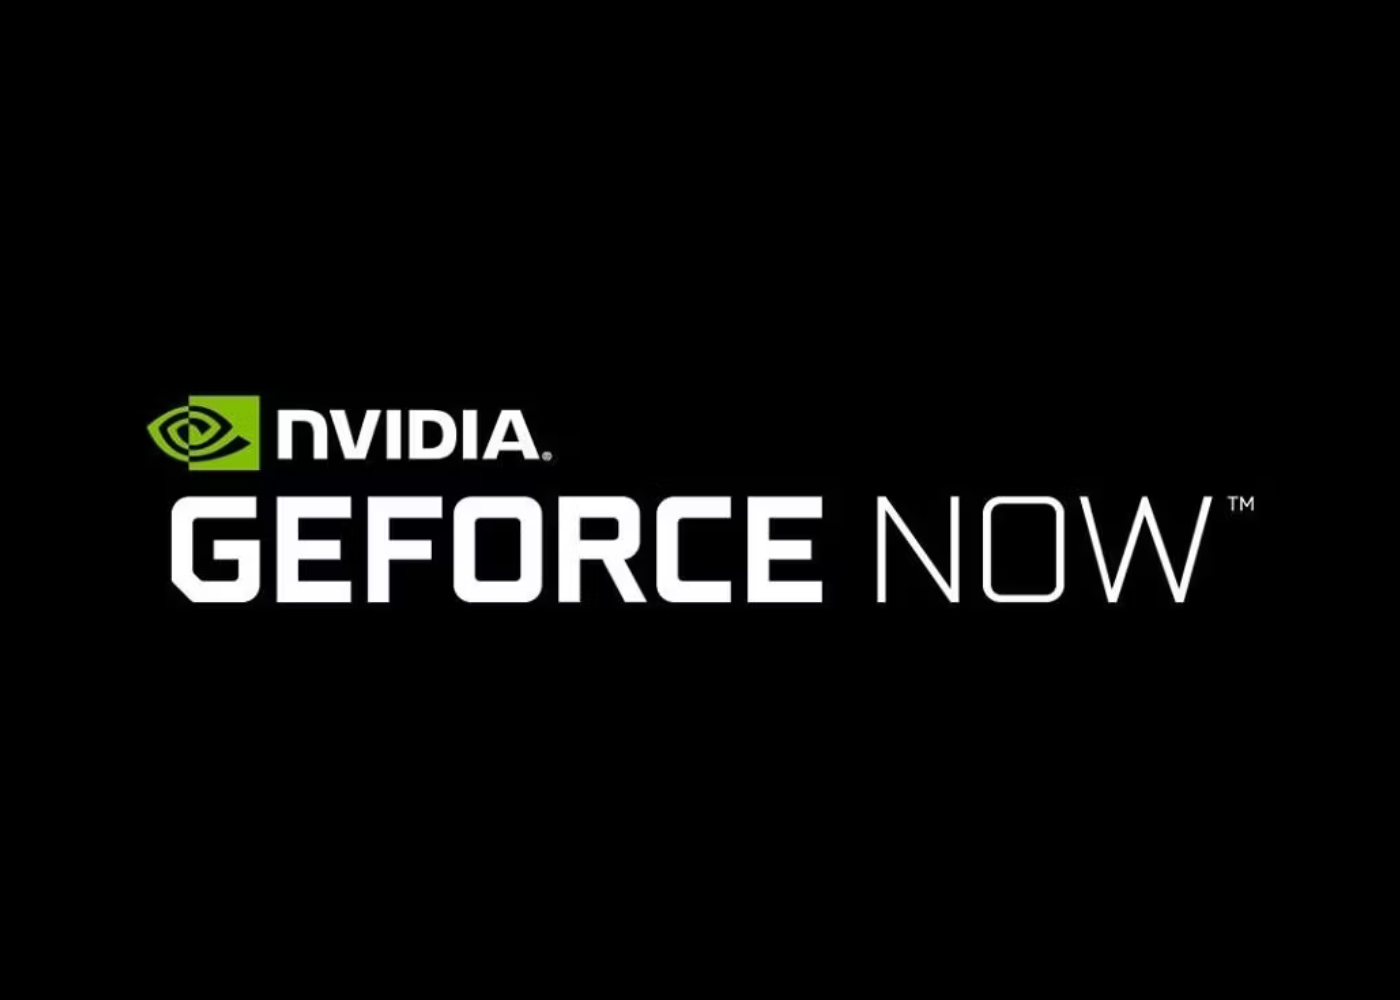 What NVIDIA GeForce NOW Offers The Gaming Community